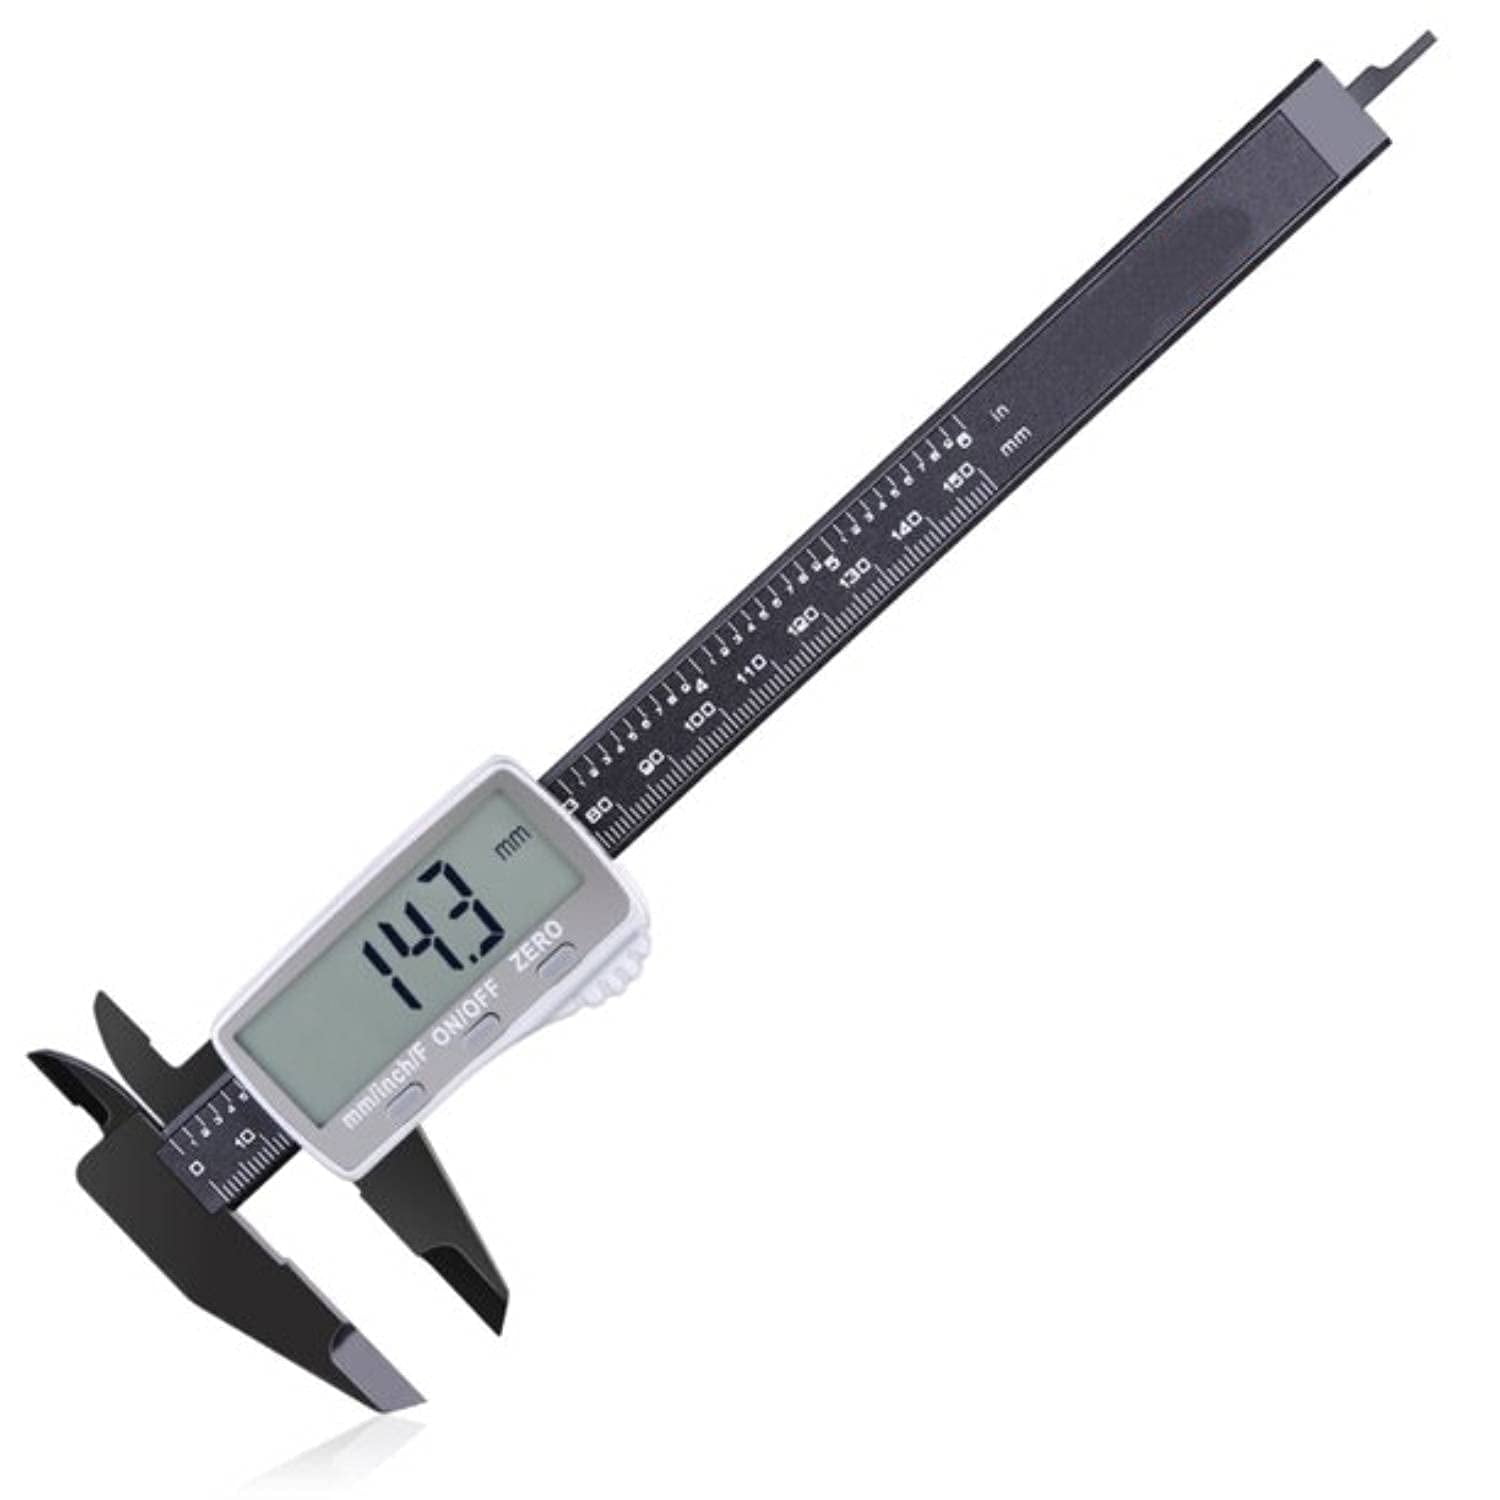 Thumb-Roll Accurate Setting and 150mm 0-6 Inch/Metric Conversion,IP54,Auto Off Mode DC02 Caliper Tacklife Digital Vernier Caliper Stainless Steel with Higher Accuracy